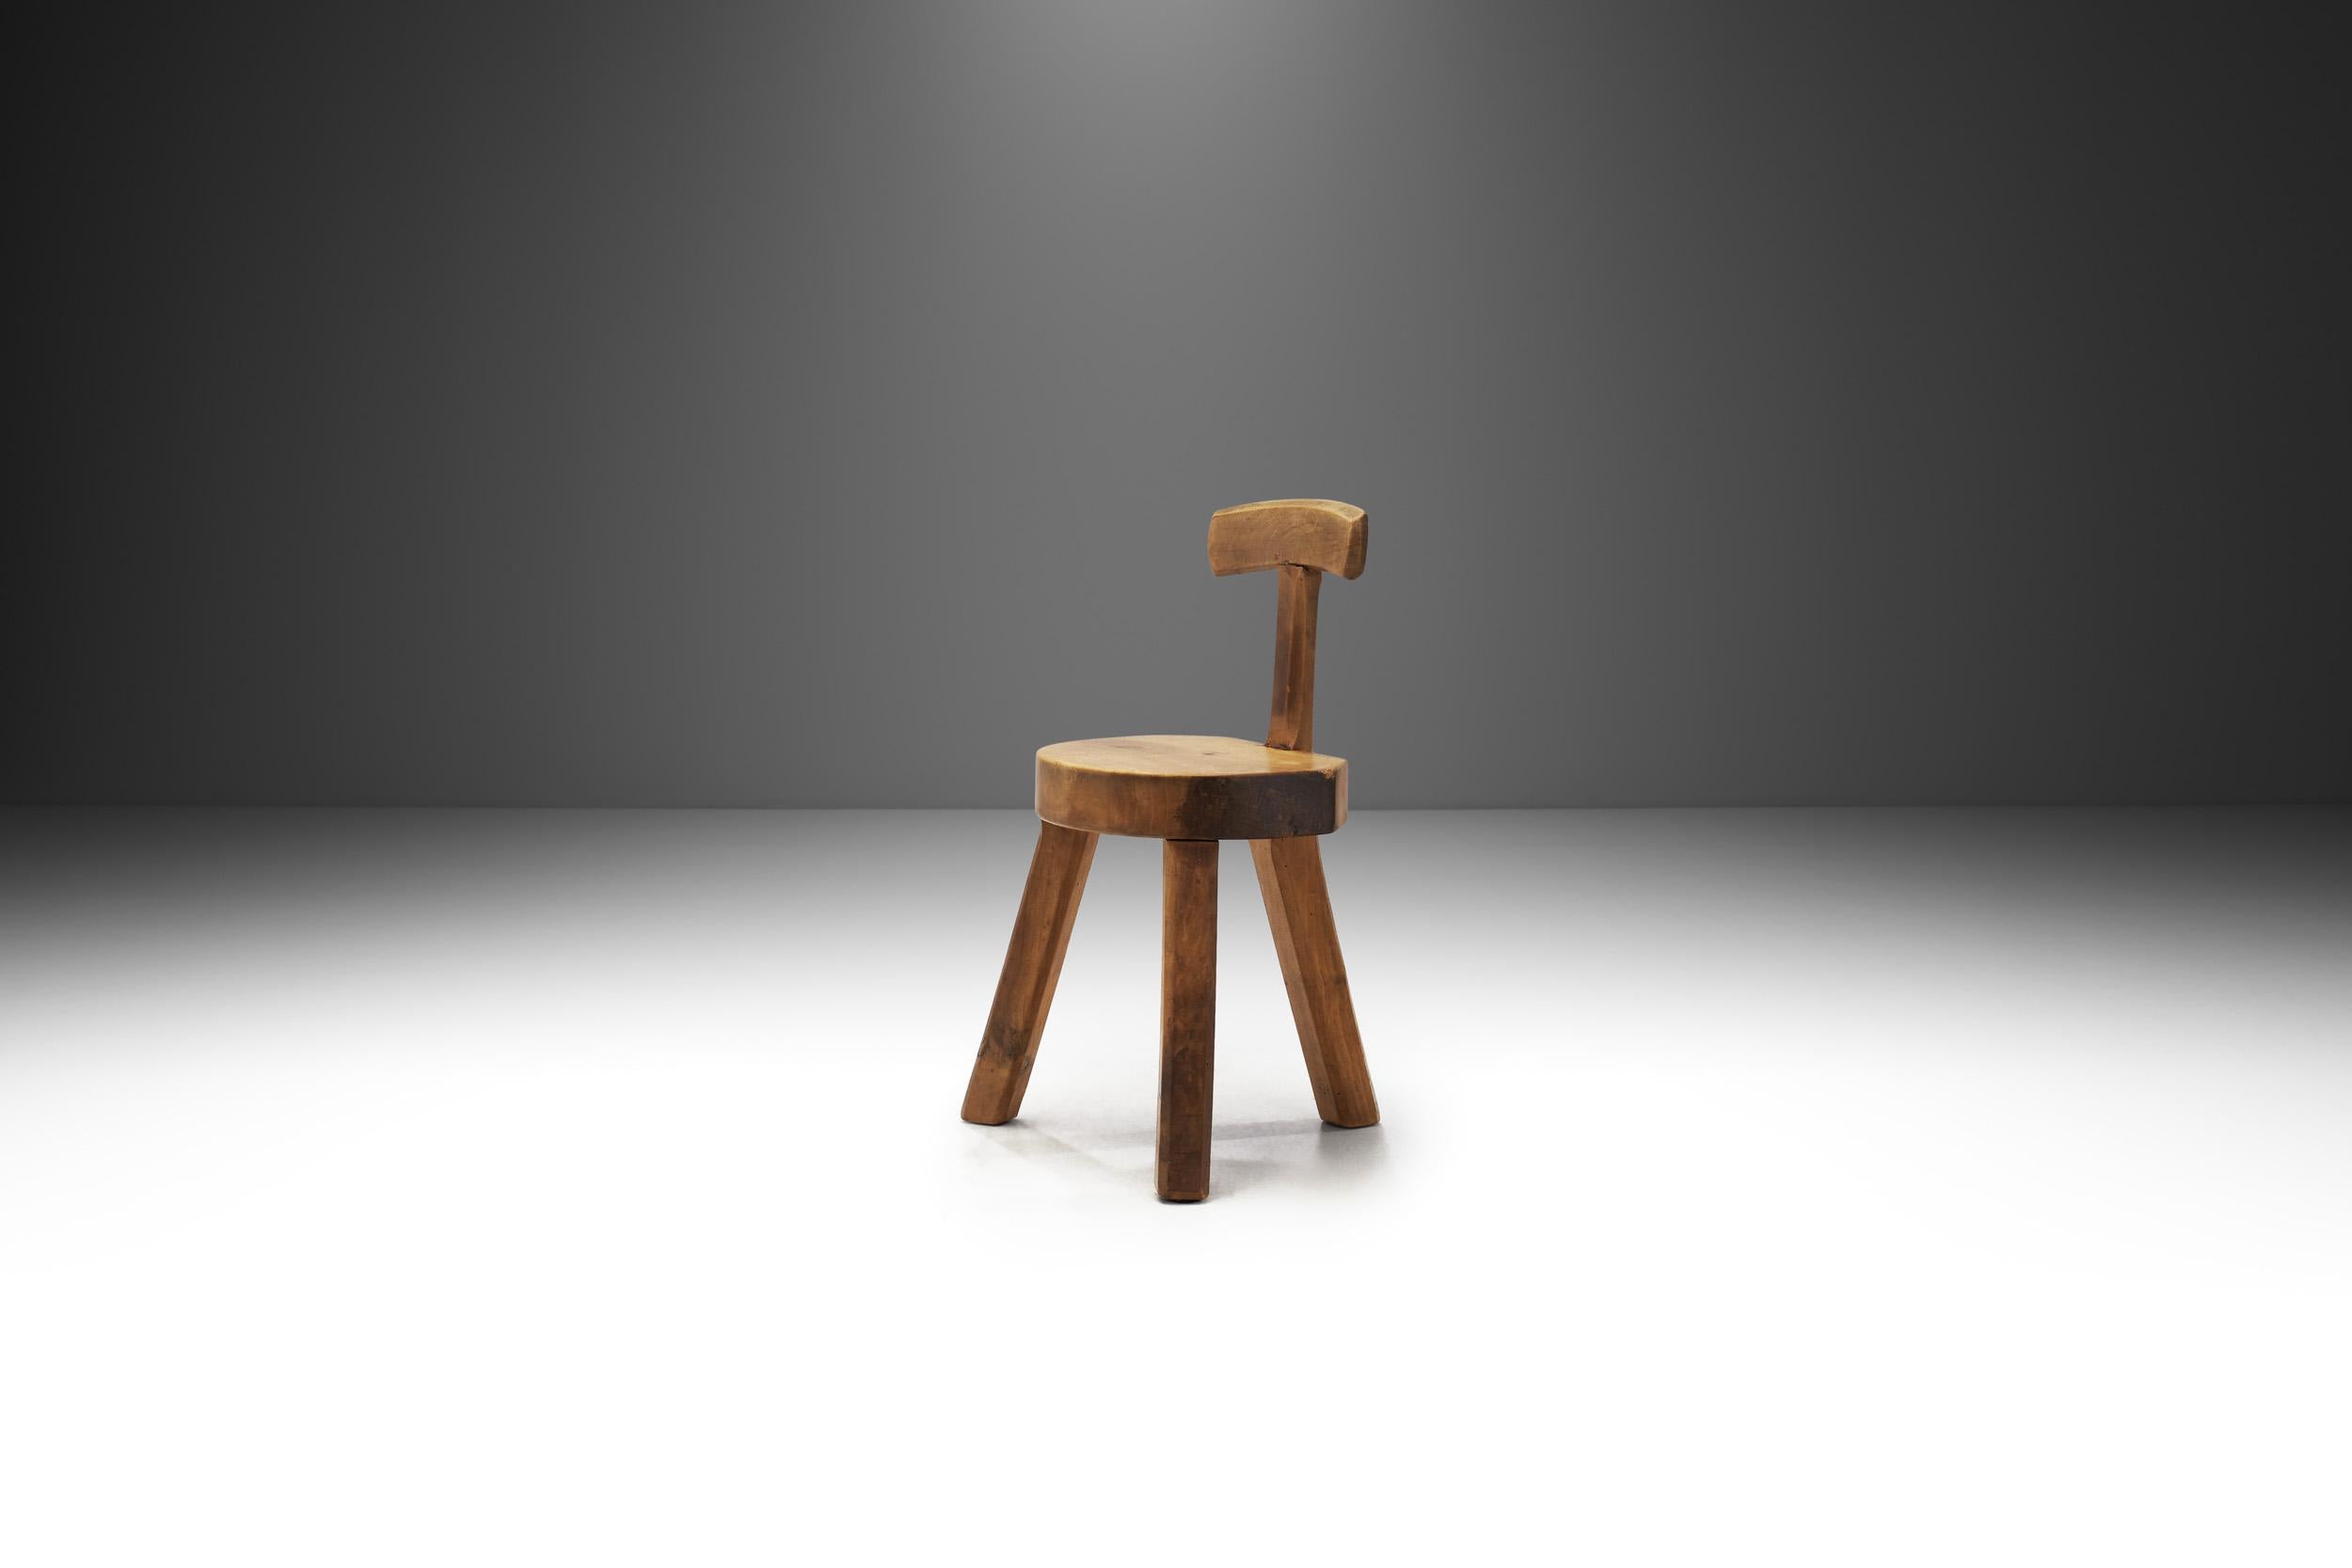 As a descendant of the modernist movement of the late 19th and the first half of the 20th century, Brutalism favoured celebrating the imperfect appeal of handmade items. This solid wood chair has an elemental look aided by the expert construction